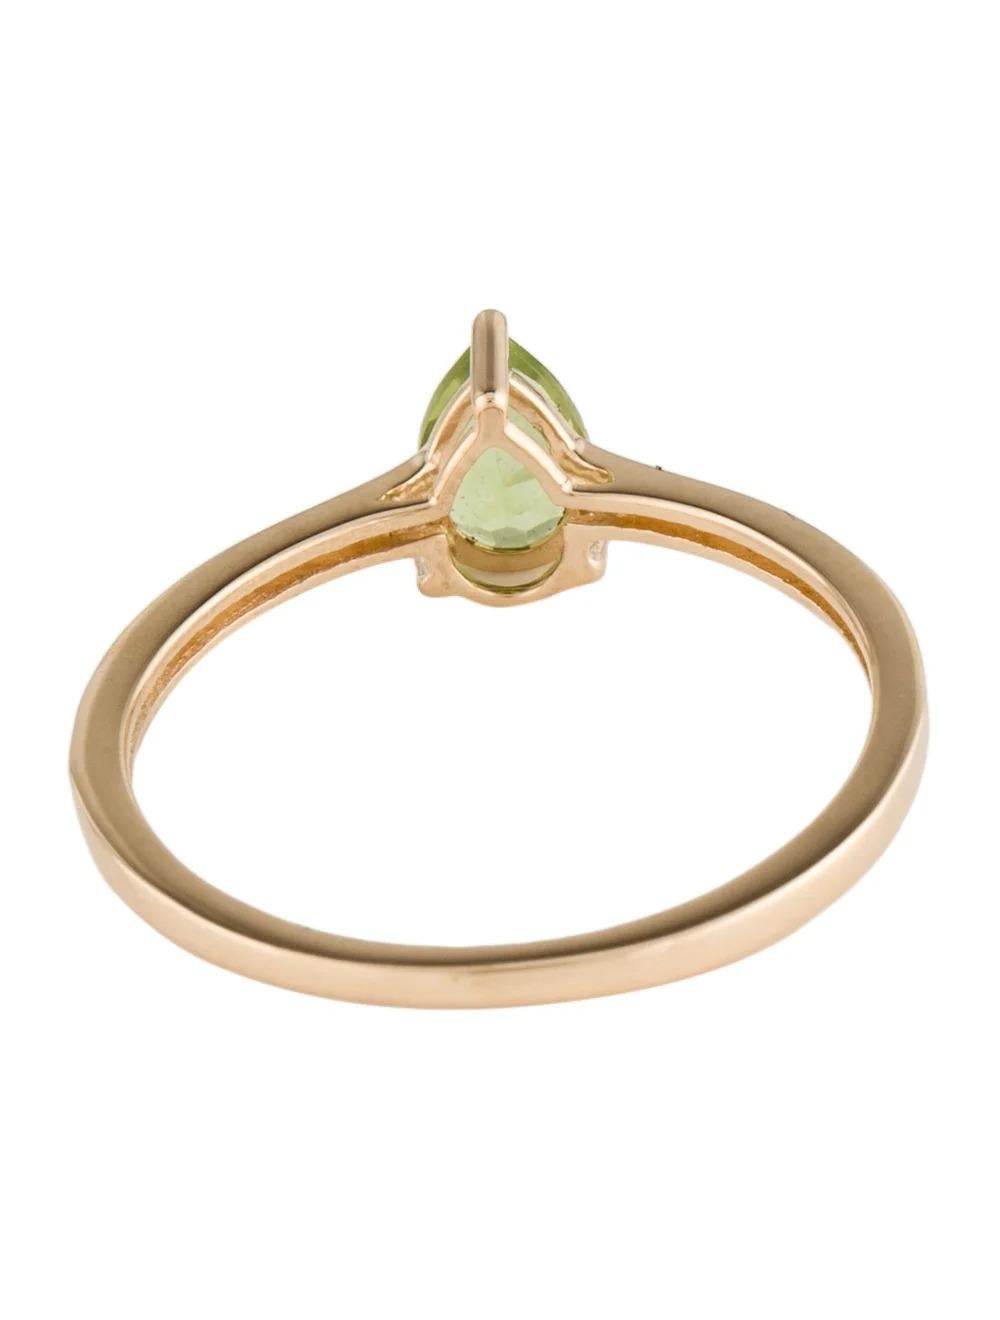 14K Peridot Cocktail Ring, Size 6.75 - Vibrant Green Gemstone, Yellow Gold In New Condition For Sale In Holtsville, NY